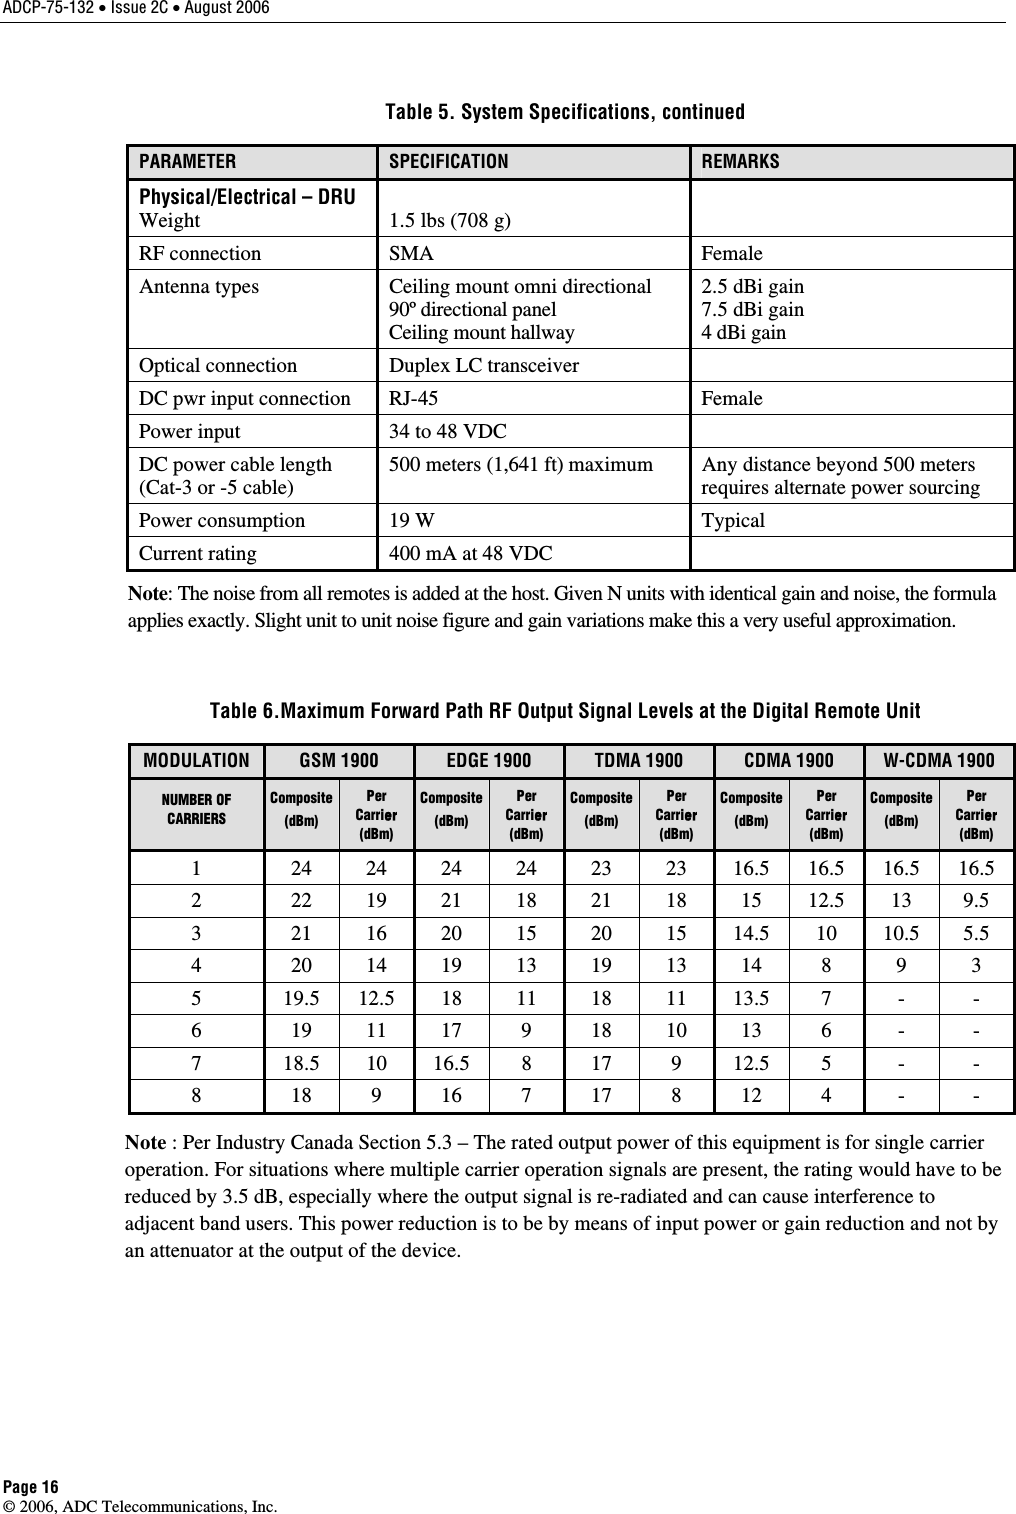 ADCP-75-132 • Issue 2C • August 2006 Page 16 © 2006, ADC Telecommunications, Inc. Table 5. System Specifications, continued PARAMETER  SPECIFICATION  REMARKS Physical/Electrical – DRU Weight  1.5 lbs (708 g)  RF connection  SMA  Female Antenna types  Ceiling mount omni directional  90º directional panel Ceiling mount hallway  2.5 dBi gain 7.5 dBi gain 4 dBi gain Optical connection  Duplex LC transceiver   DC pwr input connection  RJ-45  Female Power input  34 to 48 VDC   DC power cable length (Cat-3 or -5 cable) 500 meters (1,641 ft) maximum  Any distance beyond 500 meters requires alternate power sourcing Power consumption  19 W  Typical Current rating  400 mA at 48 VDC   Note: The noise from all remotes is added at the host. Given N units with identical gain and noise, the formula applies exactly. Slight unit to unit noise figure and gain variations make this a very useful approximation.   Table 6.Maximum Forward Path RF Output Signal Levels at the Digital Remote Unit MODULATION  GSM 1900  EDGE 1900  TDMA 1900  CDMA 1900  W-CDMA 1900 NUMBER OF CARRIERS Composite (dBm) Per Carrier (dBm) Composite (dBm) Per Carrier (dBm) Composite (dBm) Per Carrier (dBm) Composite (dBm) Per Carrier (dBm) Composite (dBm) Per Carrier (dBm) 1  24 24 24 24 23 23 16.5 16.5 16.5 16.5 2  22 19 21 18 21 18 15 12.5 13 9.5 3  21 16 20 15 20 15 14.5 10 10.5 5.5 4  20 14 19 13 19 13 14  8  9  3 5  19.5 12.5 18 11 18 11 13.5 7  -  - 6  19 11 17  9  18 10 13  6  -  - 7  18.5 10 16.5 8 17 9 12.5 5  -  - 8  18 9 16 7 17 8 12 4  -  - Note : Per Industry Canada Section 5.3 – The rated output power of this equipment is for single carrier operation. For situations where multiple carrier operation signals are present, the rating would have to be reduced by 3.5 dB, especially where the output signal is re-radiated and can cause interference to adjacent band users. This power reduction is to be by means of input power or gain reduction and not by an attenuator at the output of the device.   